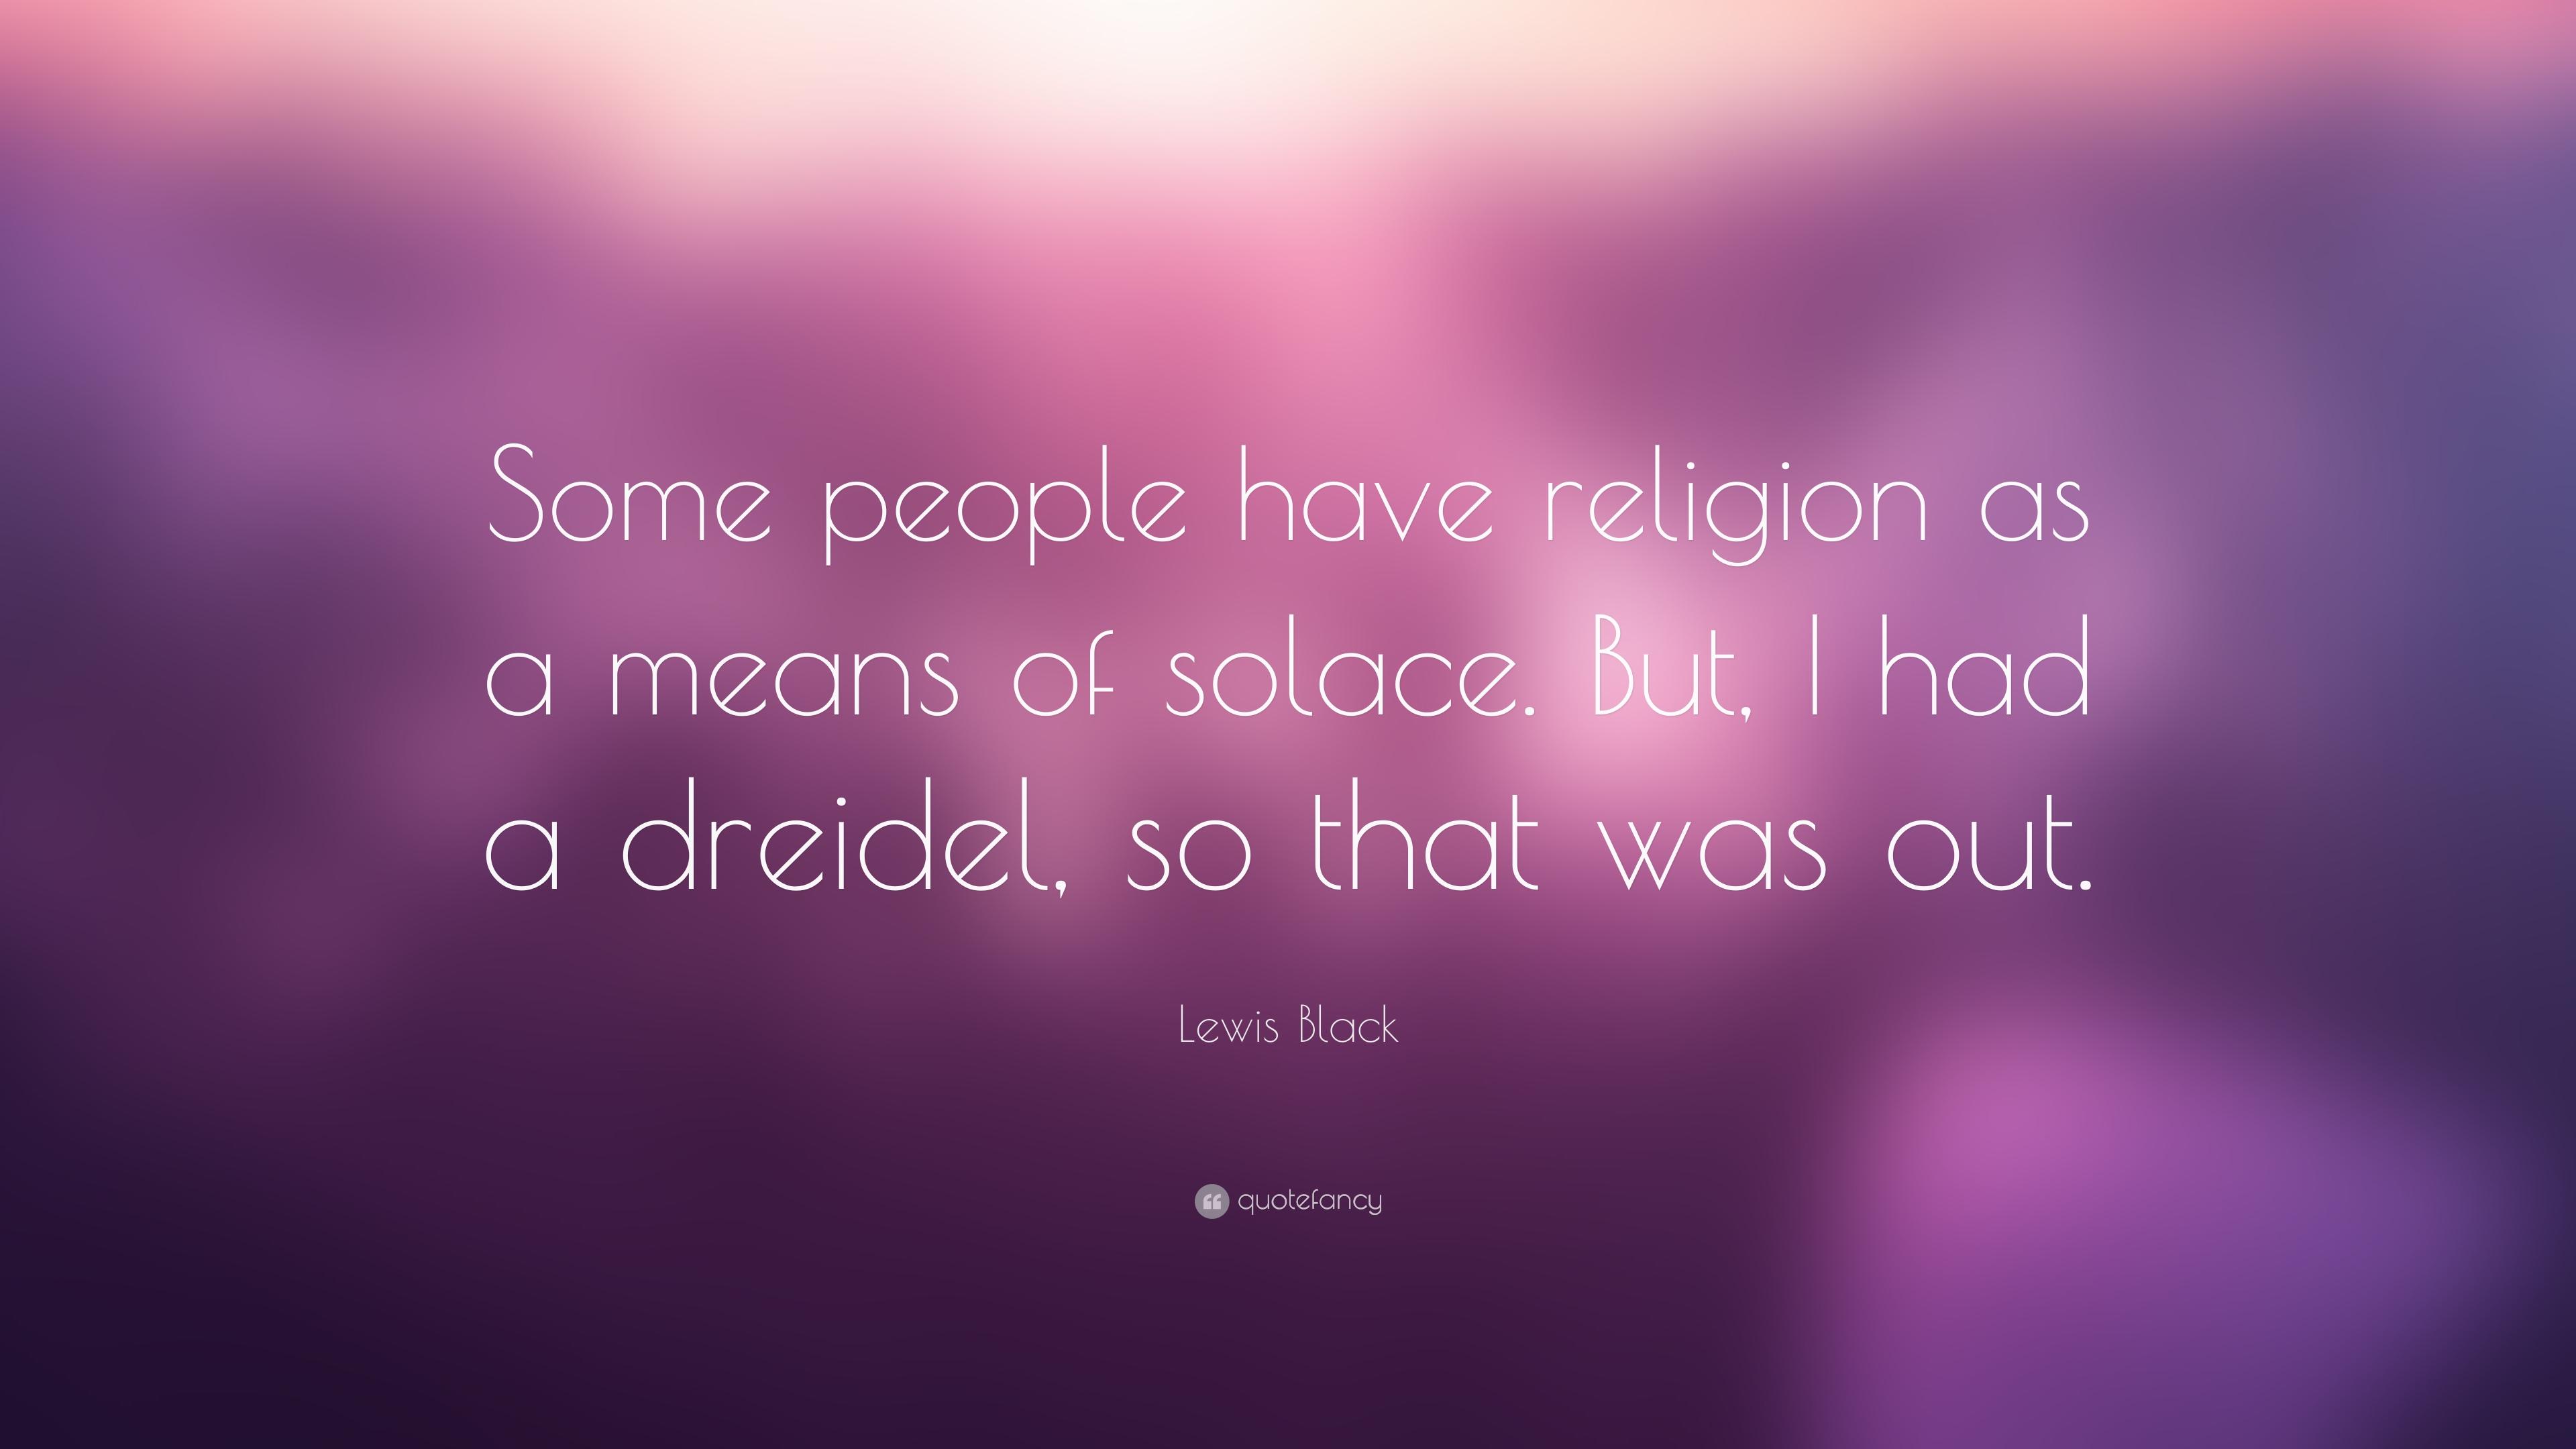 Lewis Black Quote: “Some people have religion as a means of solace